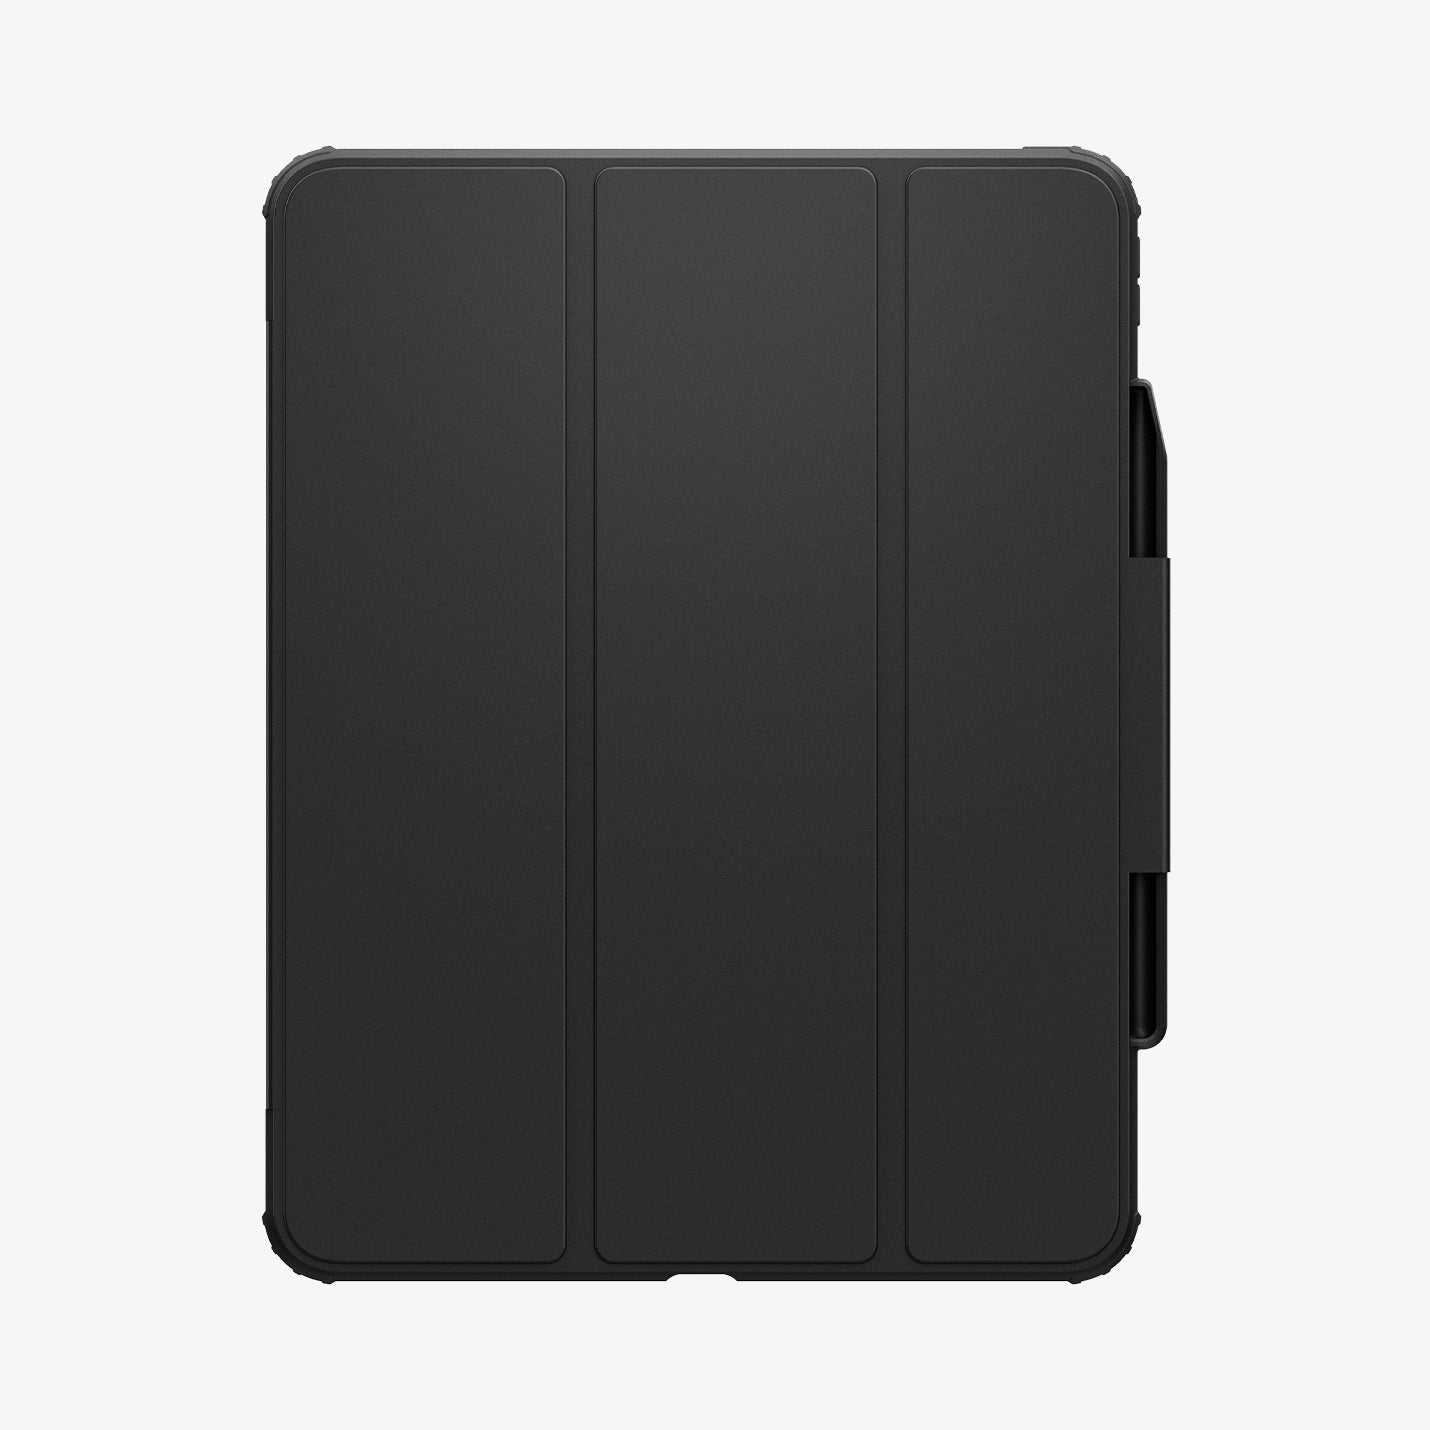 ACS07006 - iPad Pro 12.9-inch Case Ultra Hybrid Pro in Black showing the front without stylus pen